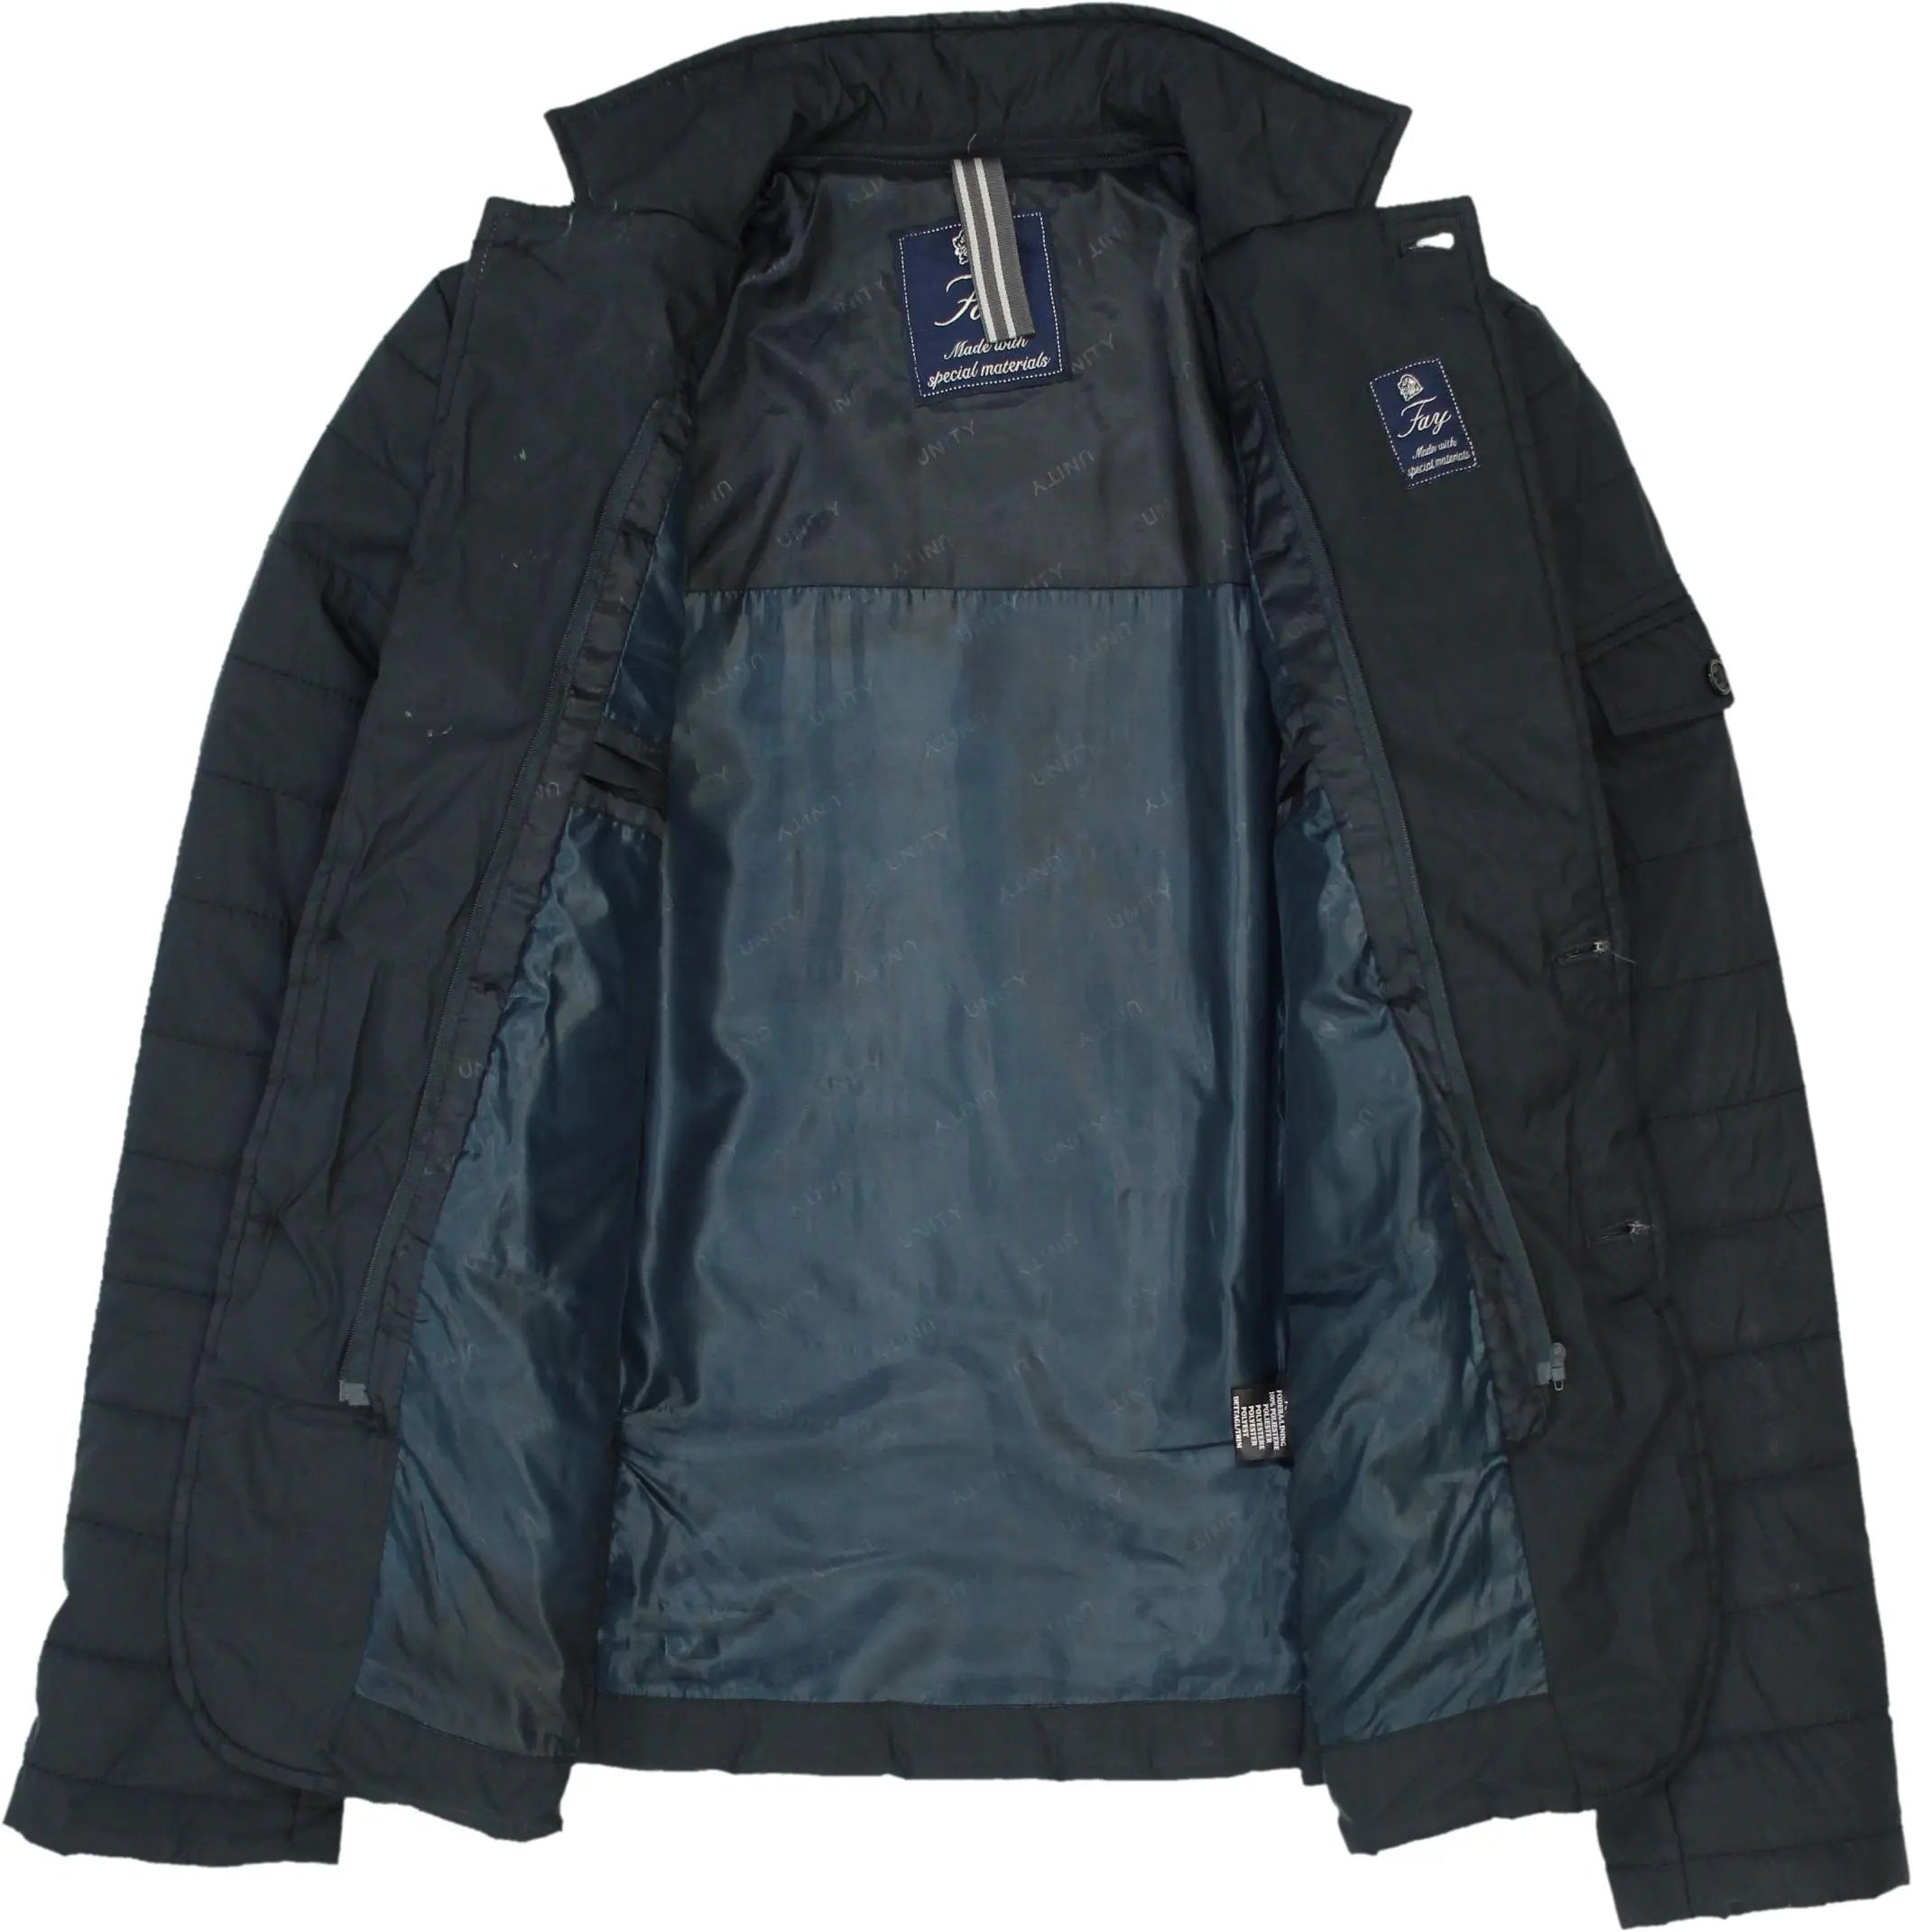 Fay - Black padded jacket by Fay- ThriftTale.com - Vintage and second handclothing